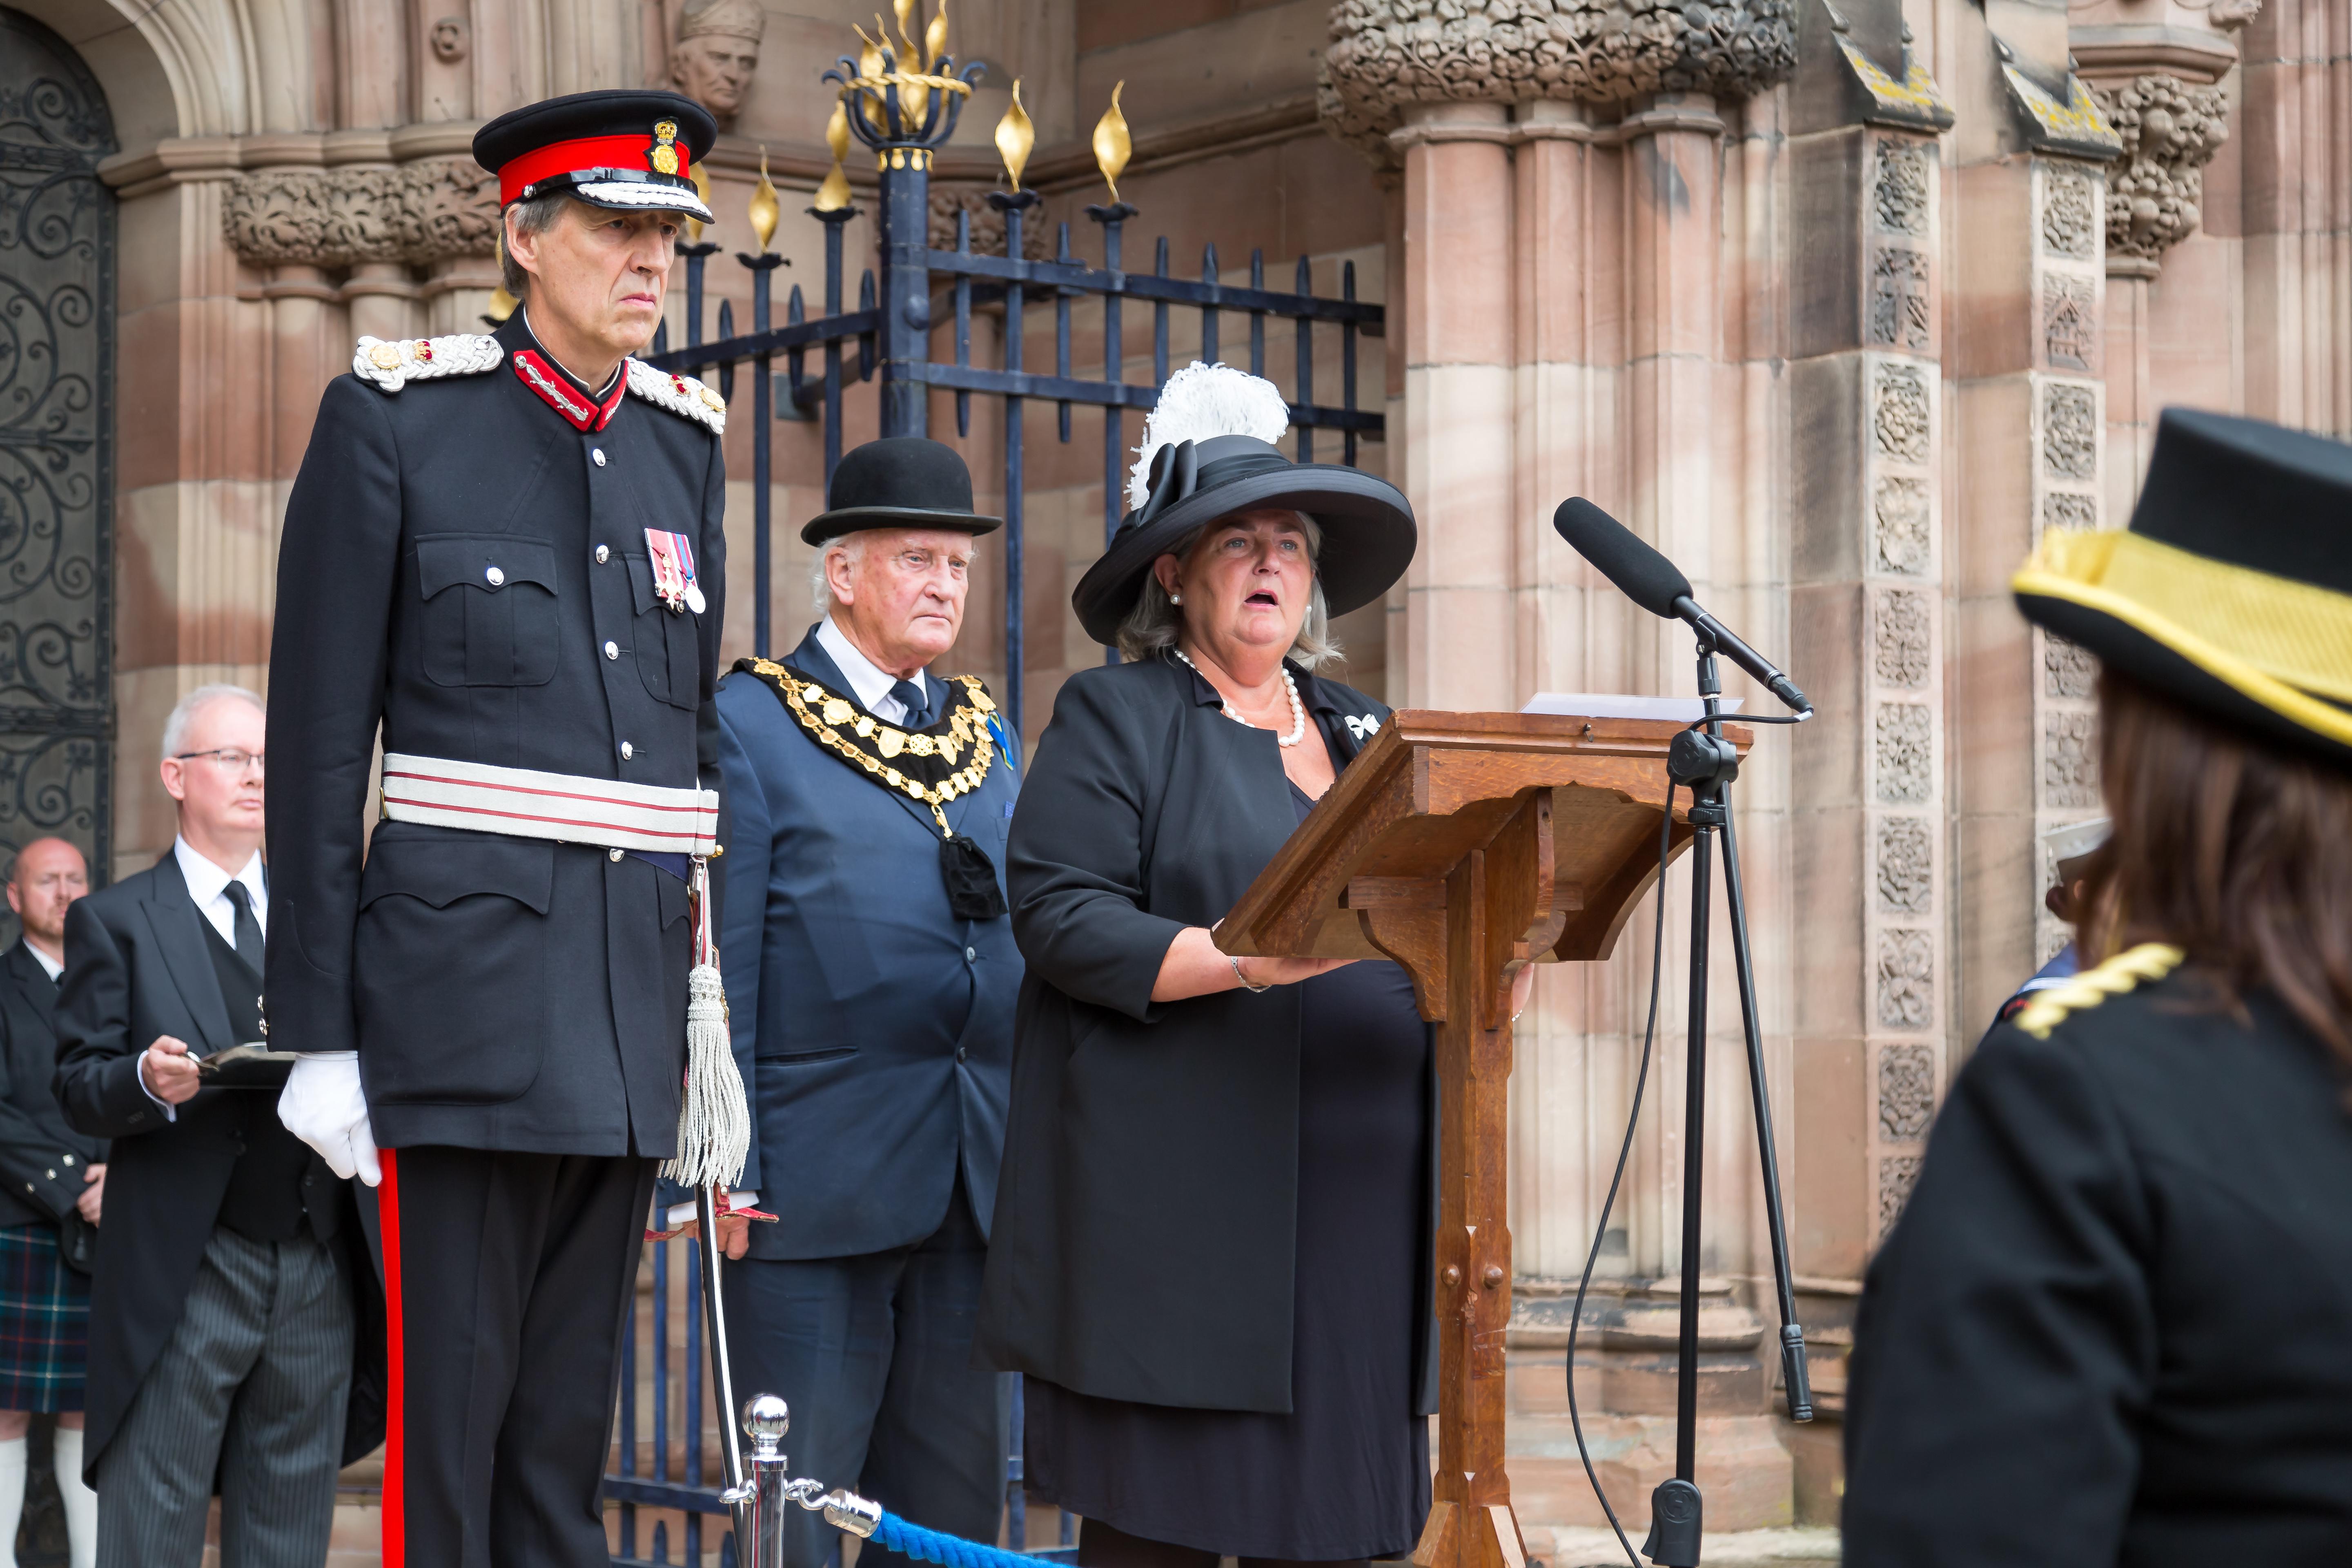 Herefordshire comes together to witness the Proclamation Ceremony of King Charles III